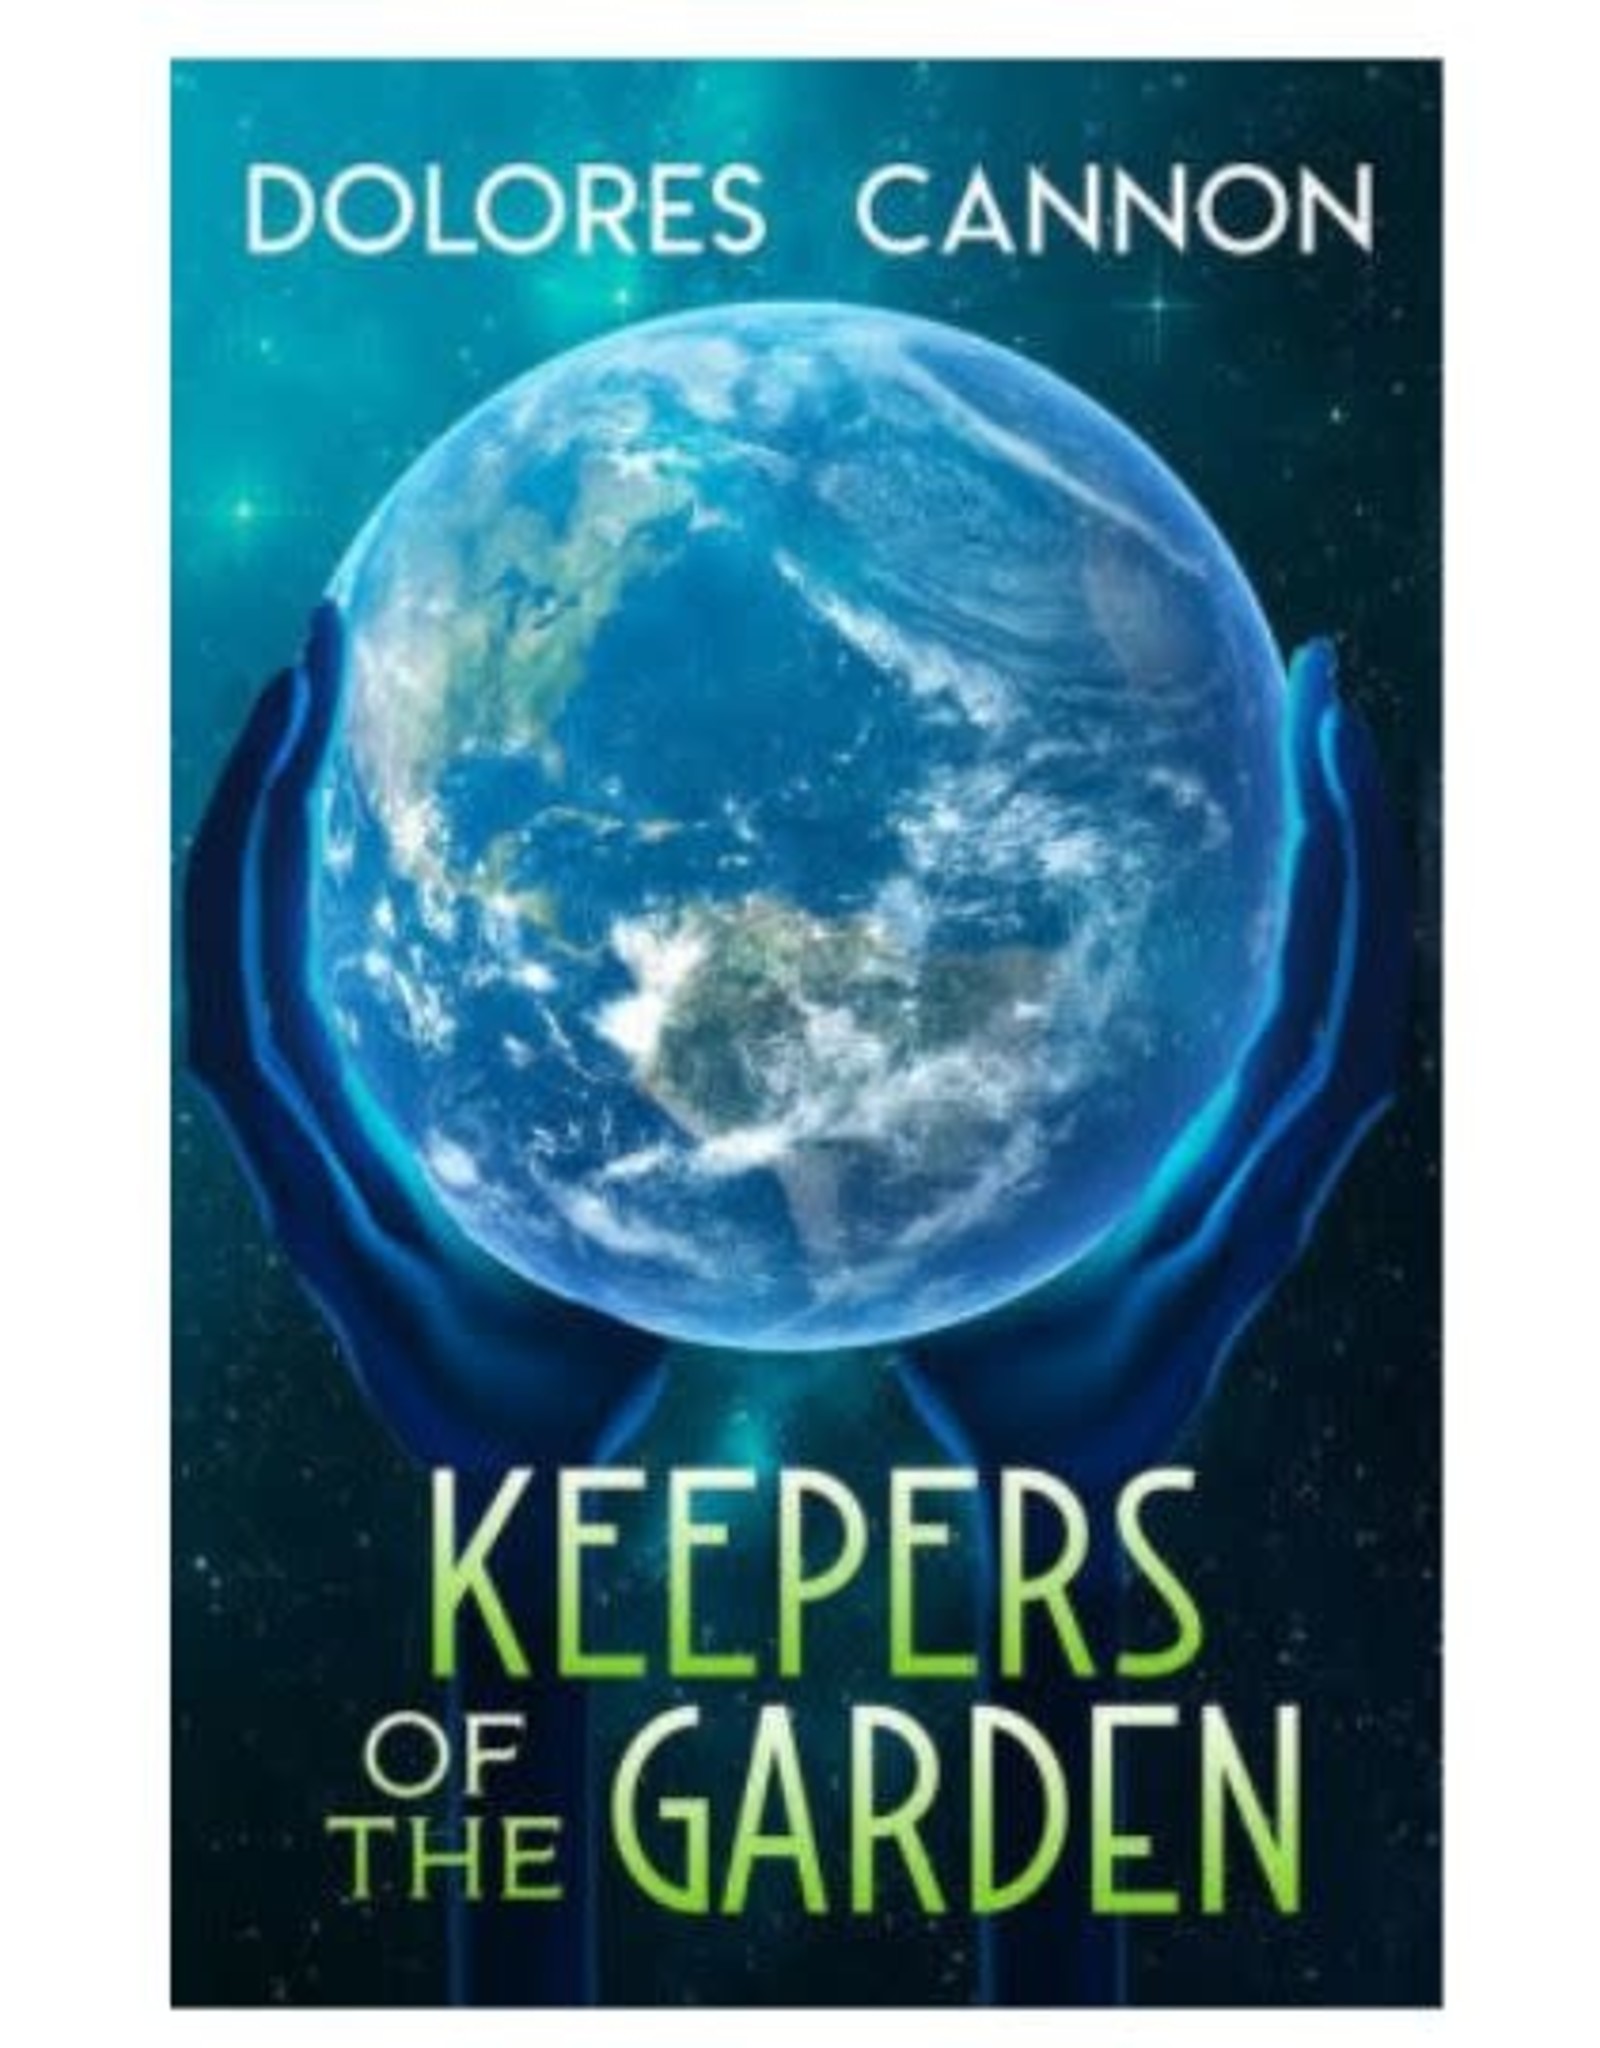 Keepers of the Garden by Dolores Cannon